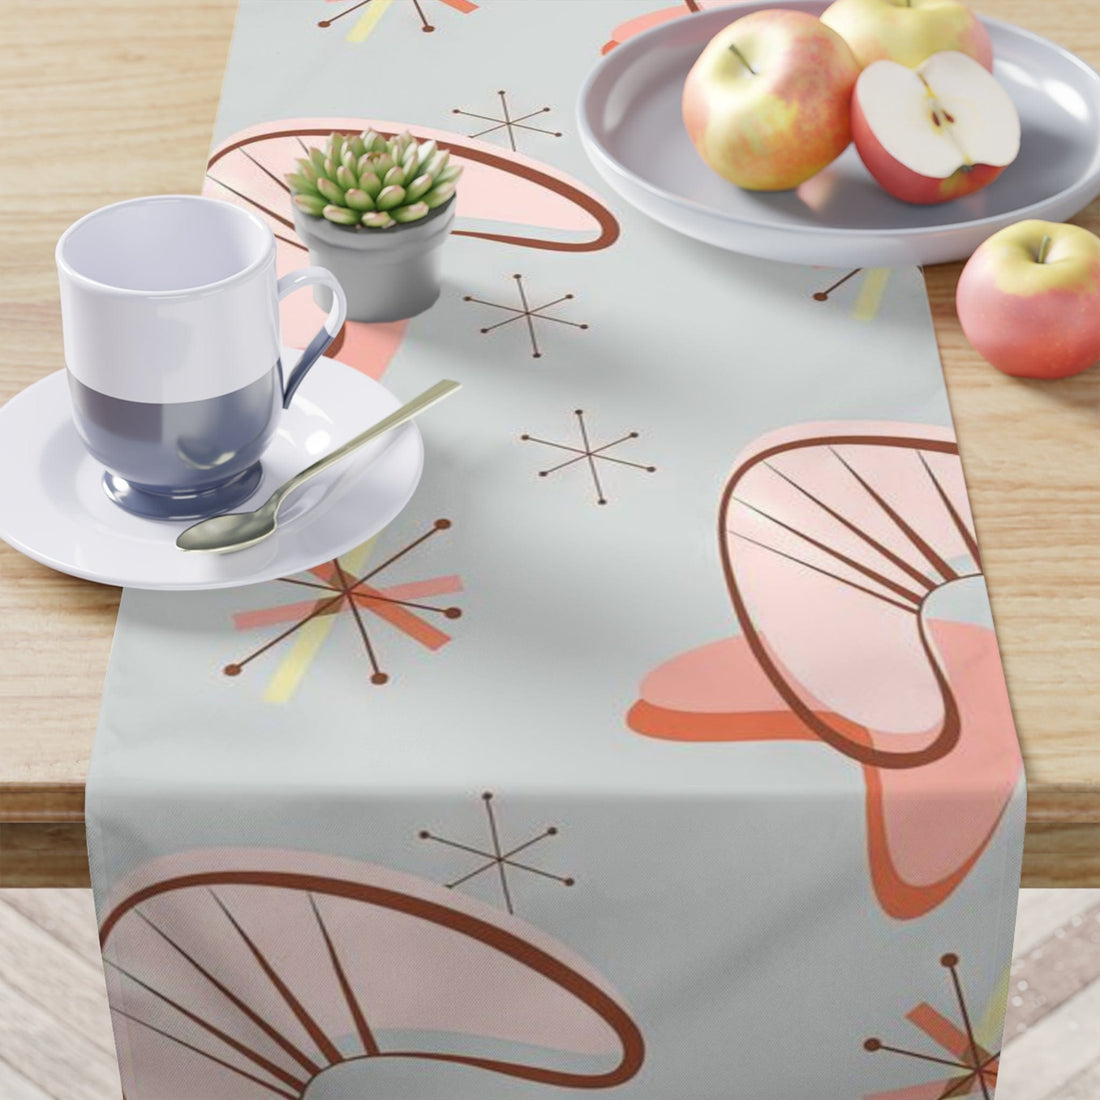 Kate McEnroe New York Retro Mid Mod Atomic Boomerang Starbursts Table Runner, MCM Blue, Coral Table Linens, 1950s Vintage Kitchen DecorTable Runners23855777557876160500